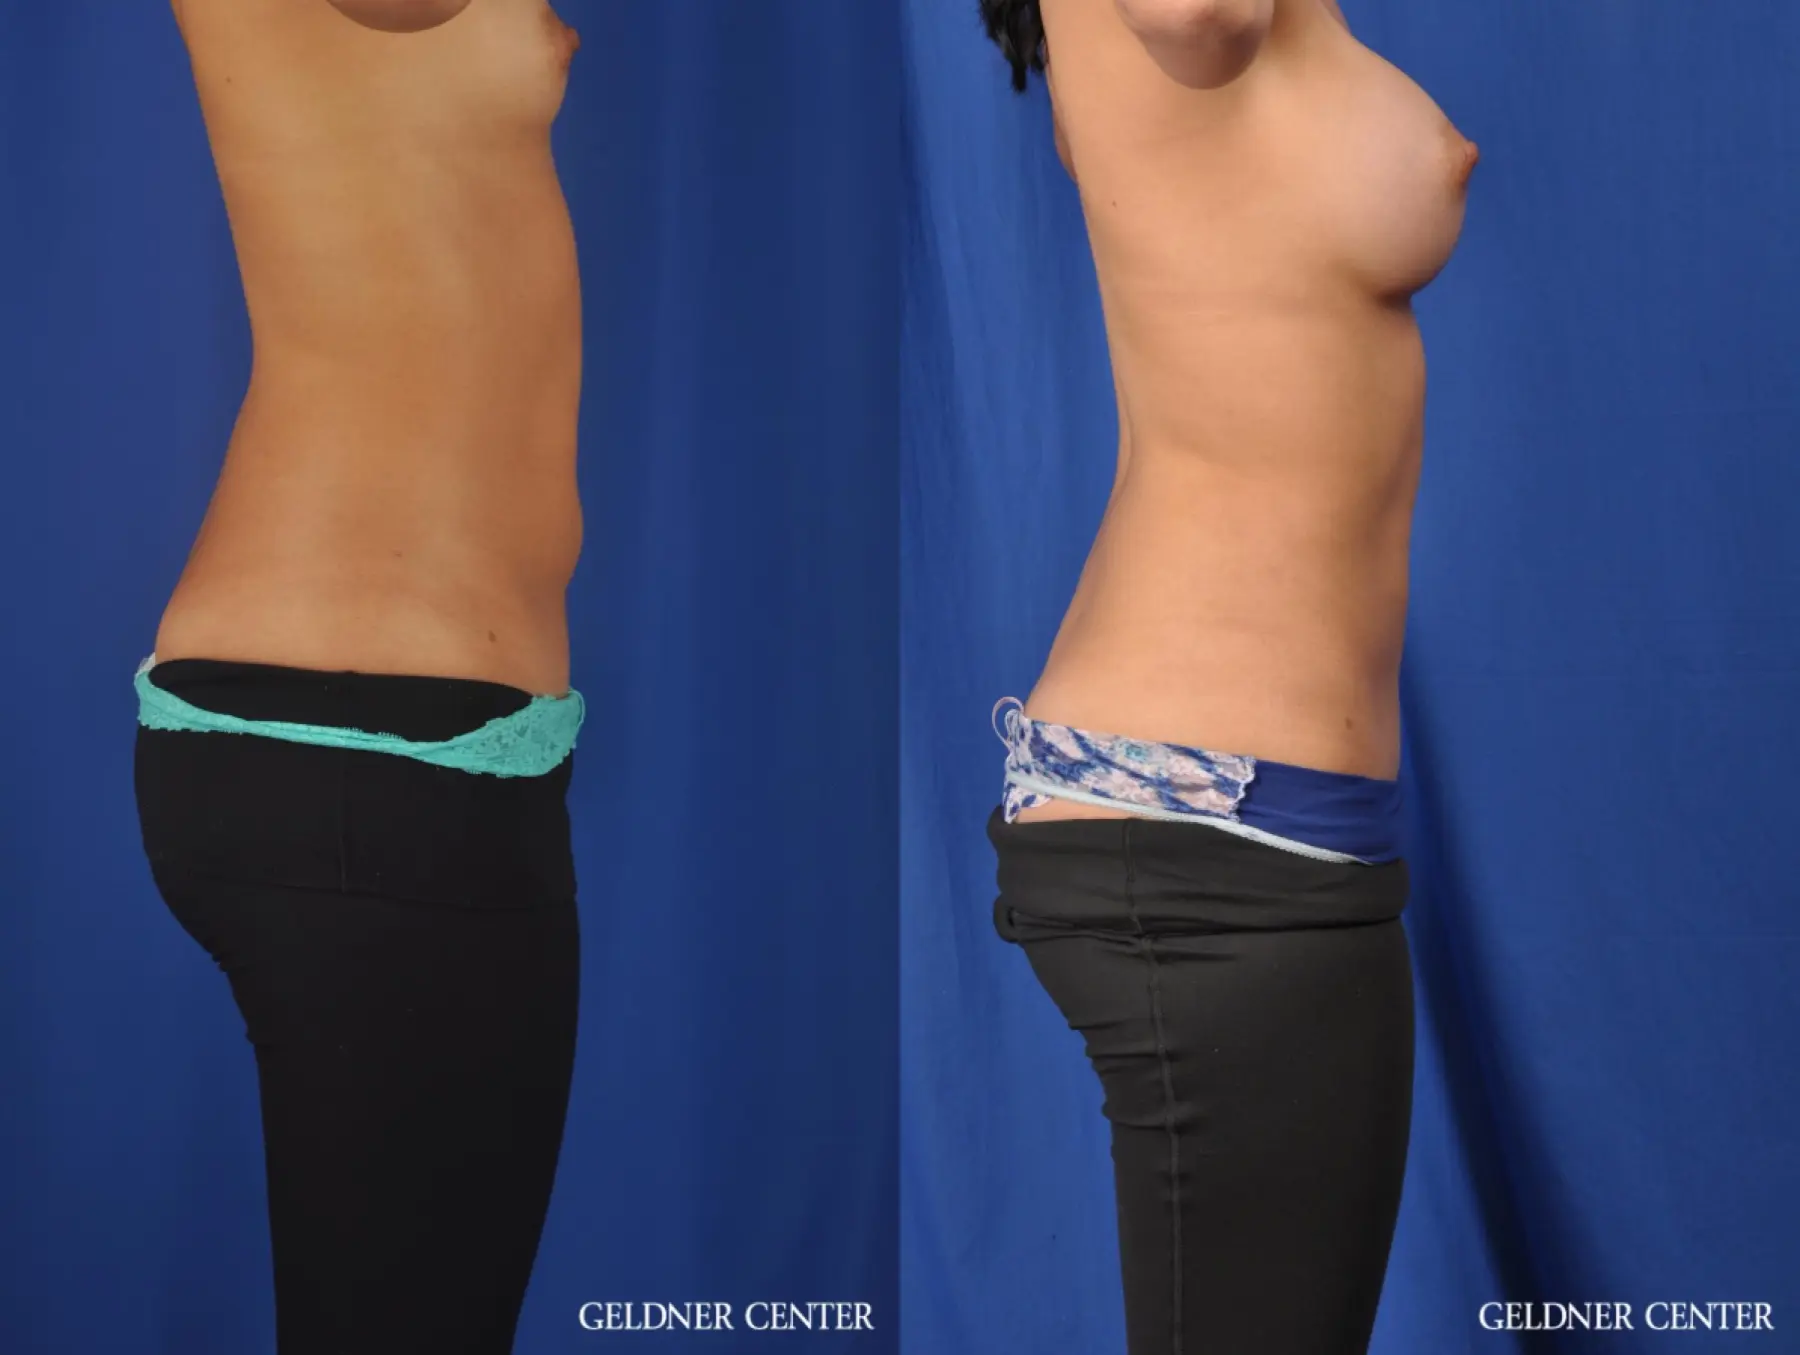 Liposuction: Patient 28 - Before and After 2